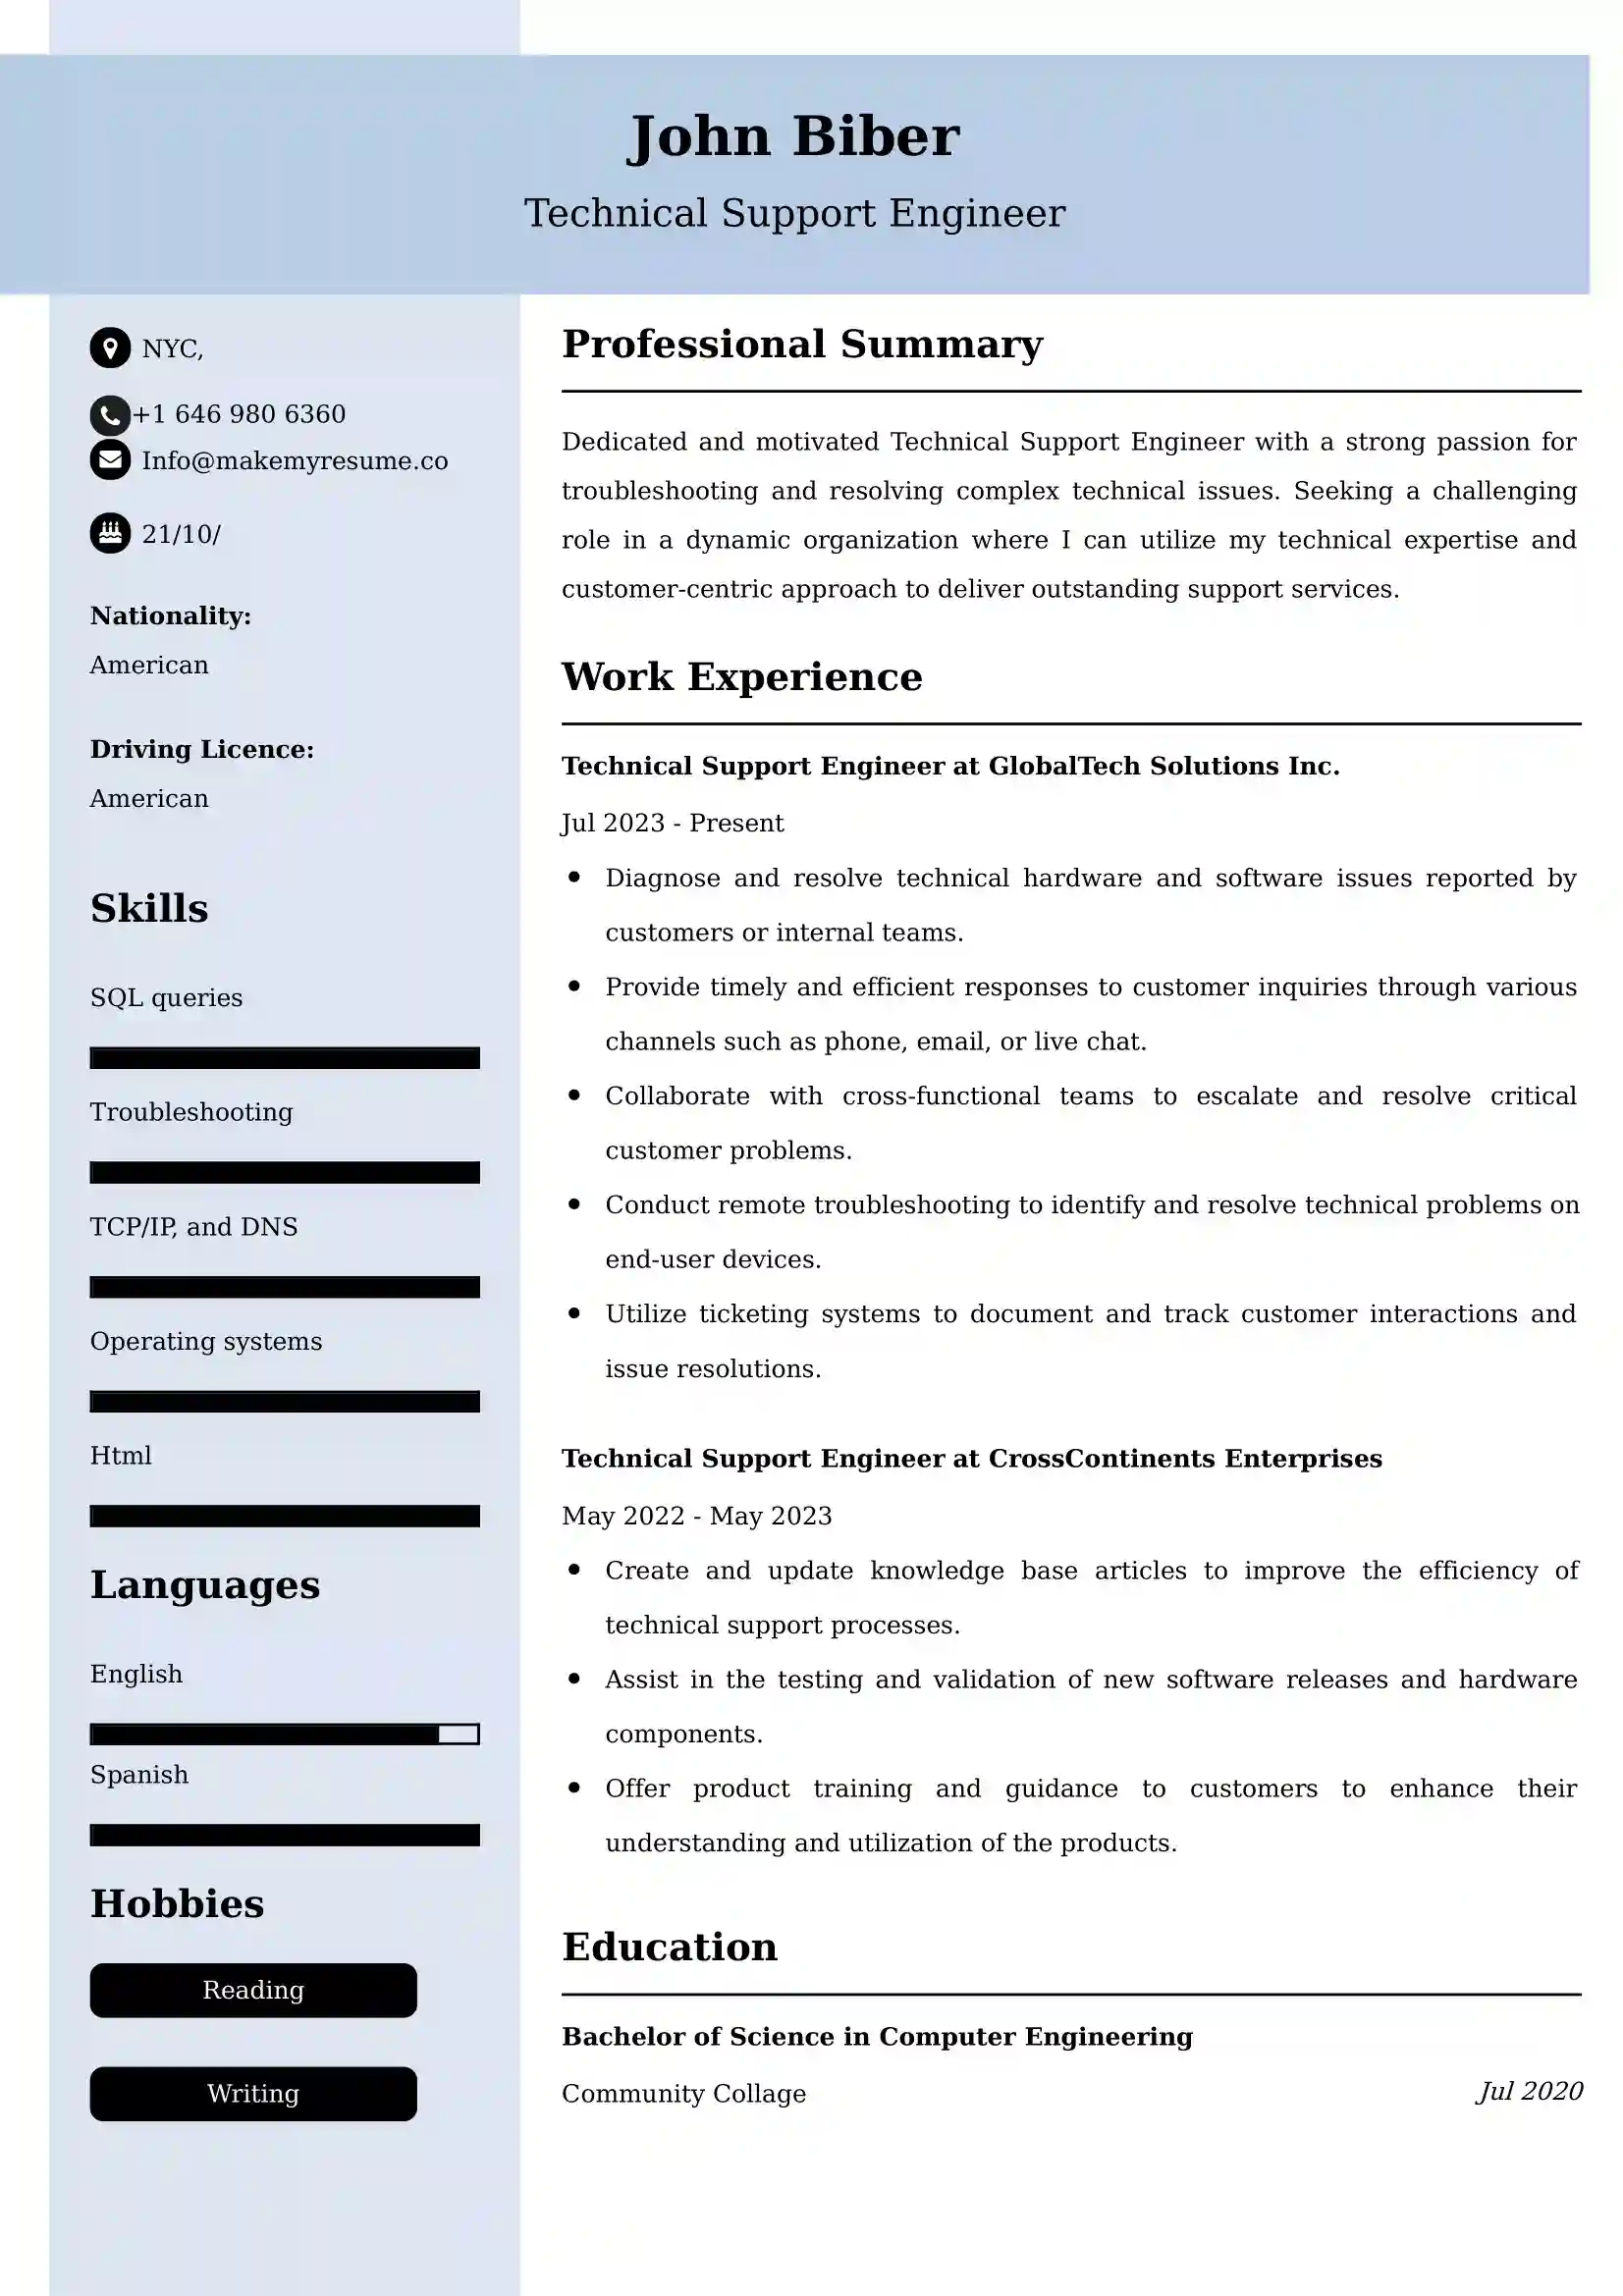 Technical Support Engineer Resume Examples - UK Format, Latest Template.